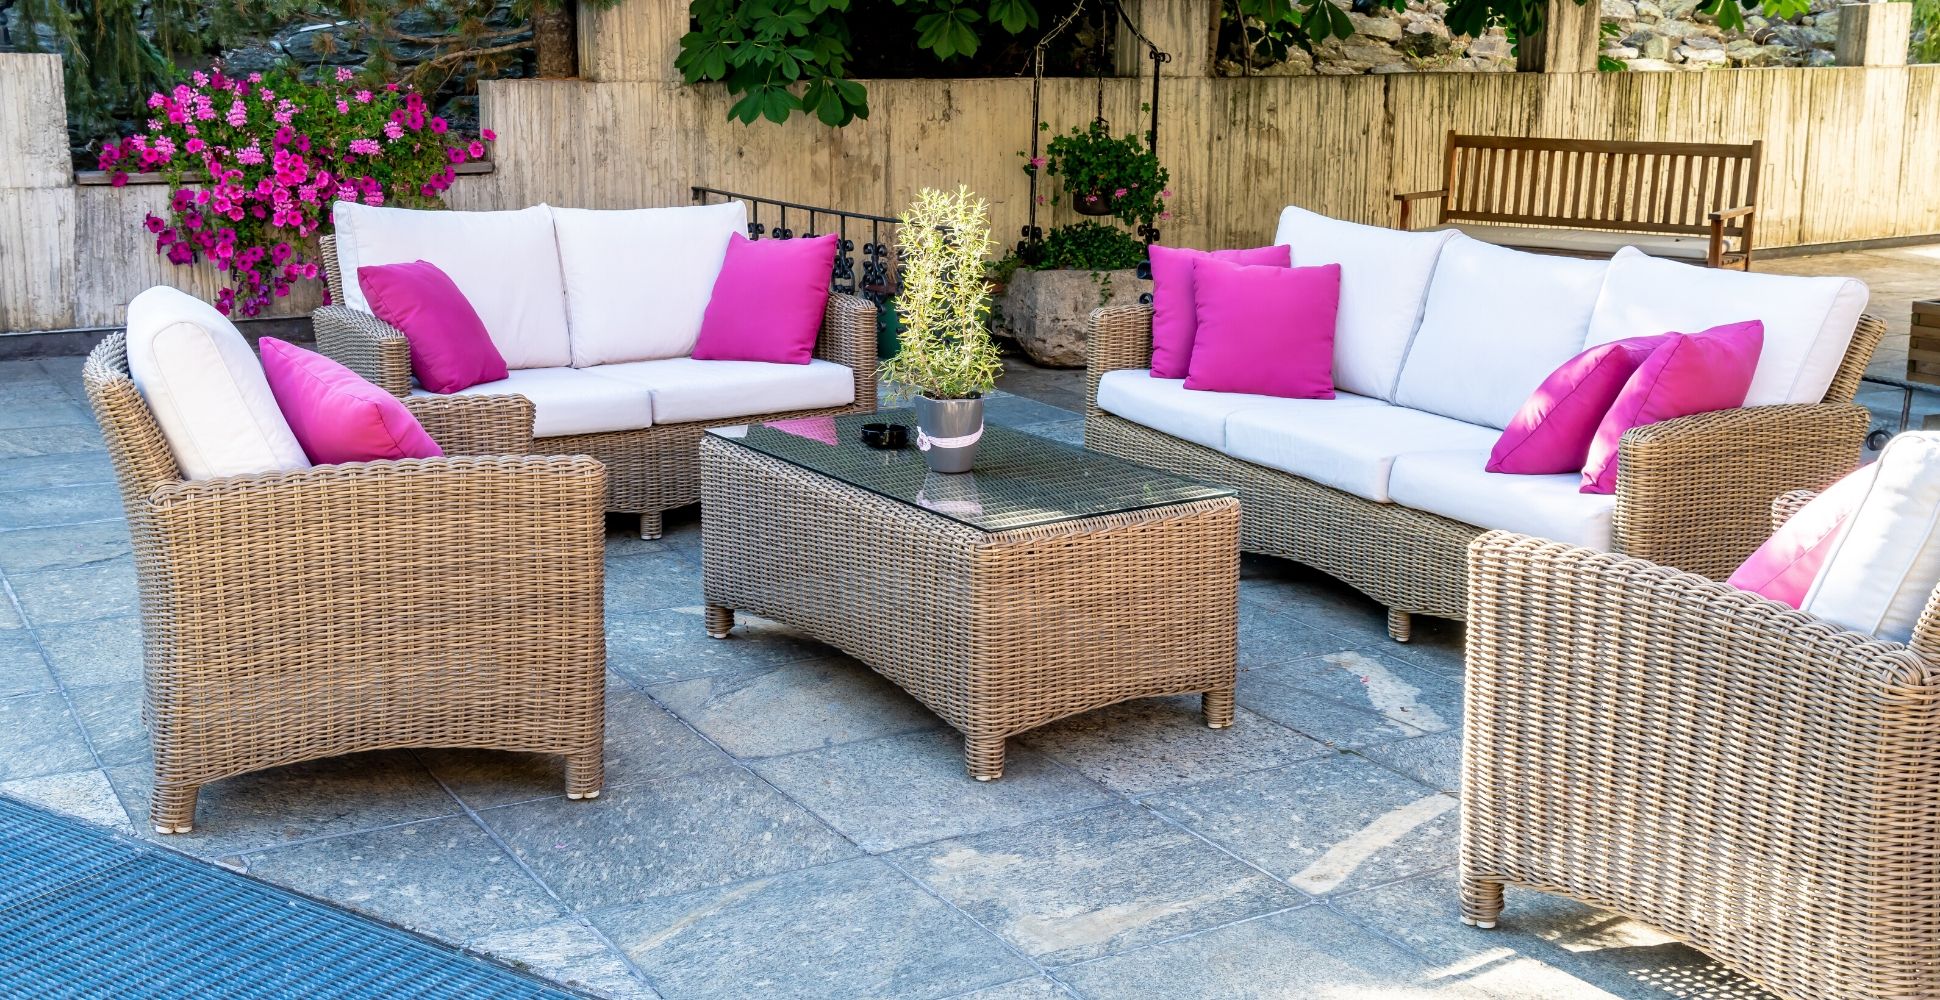 5 Best Rattan Furniture Covers UK (Sept 2020 Review)